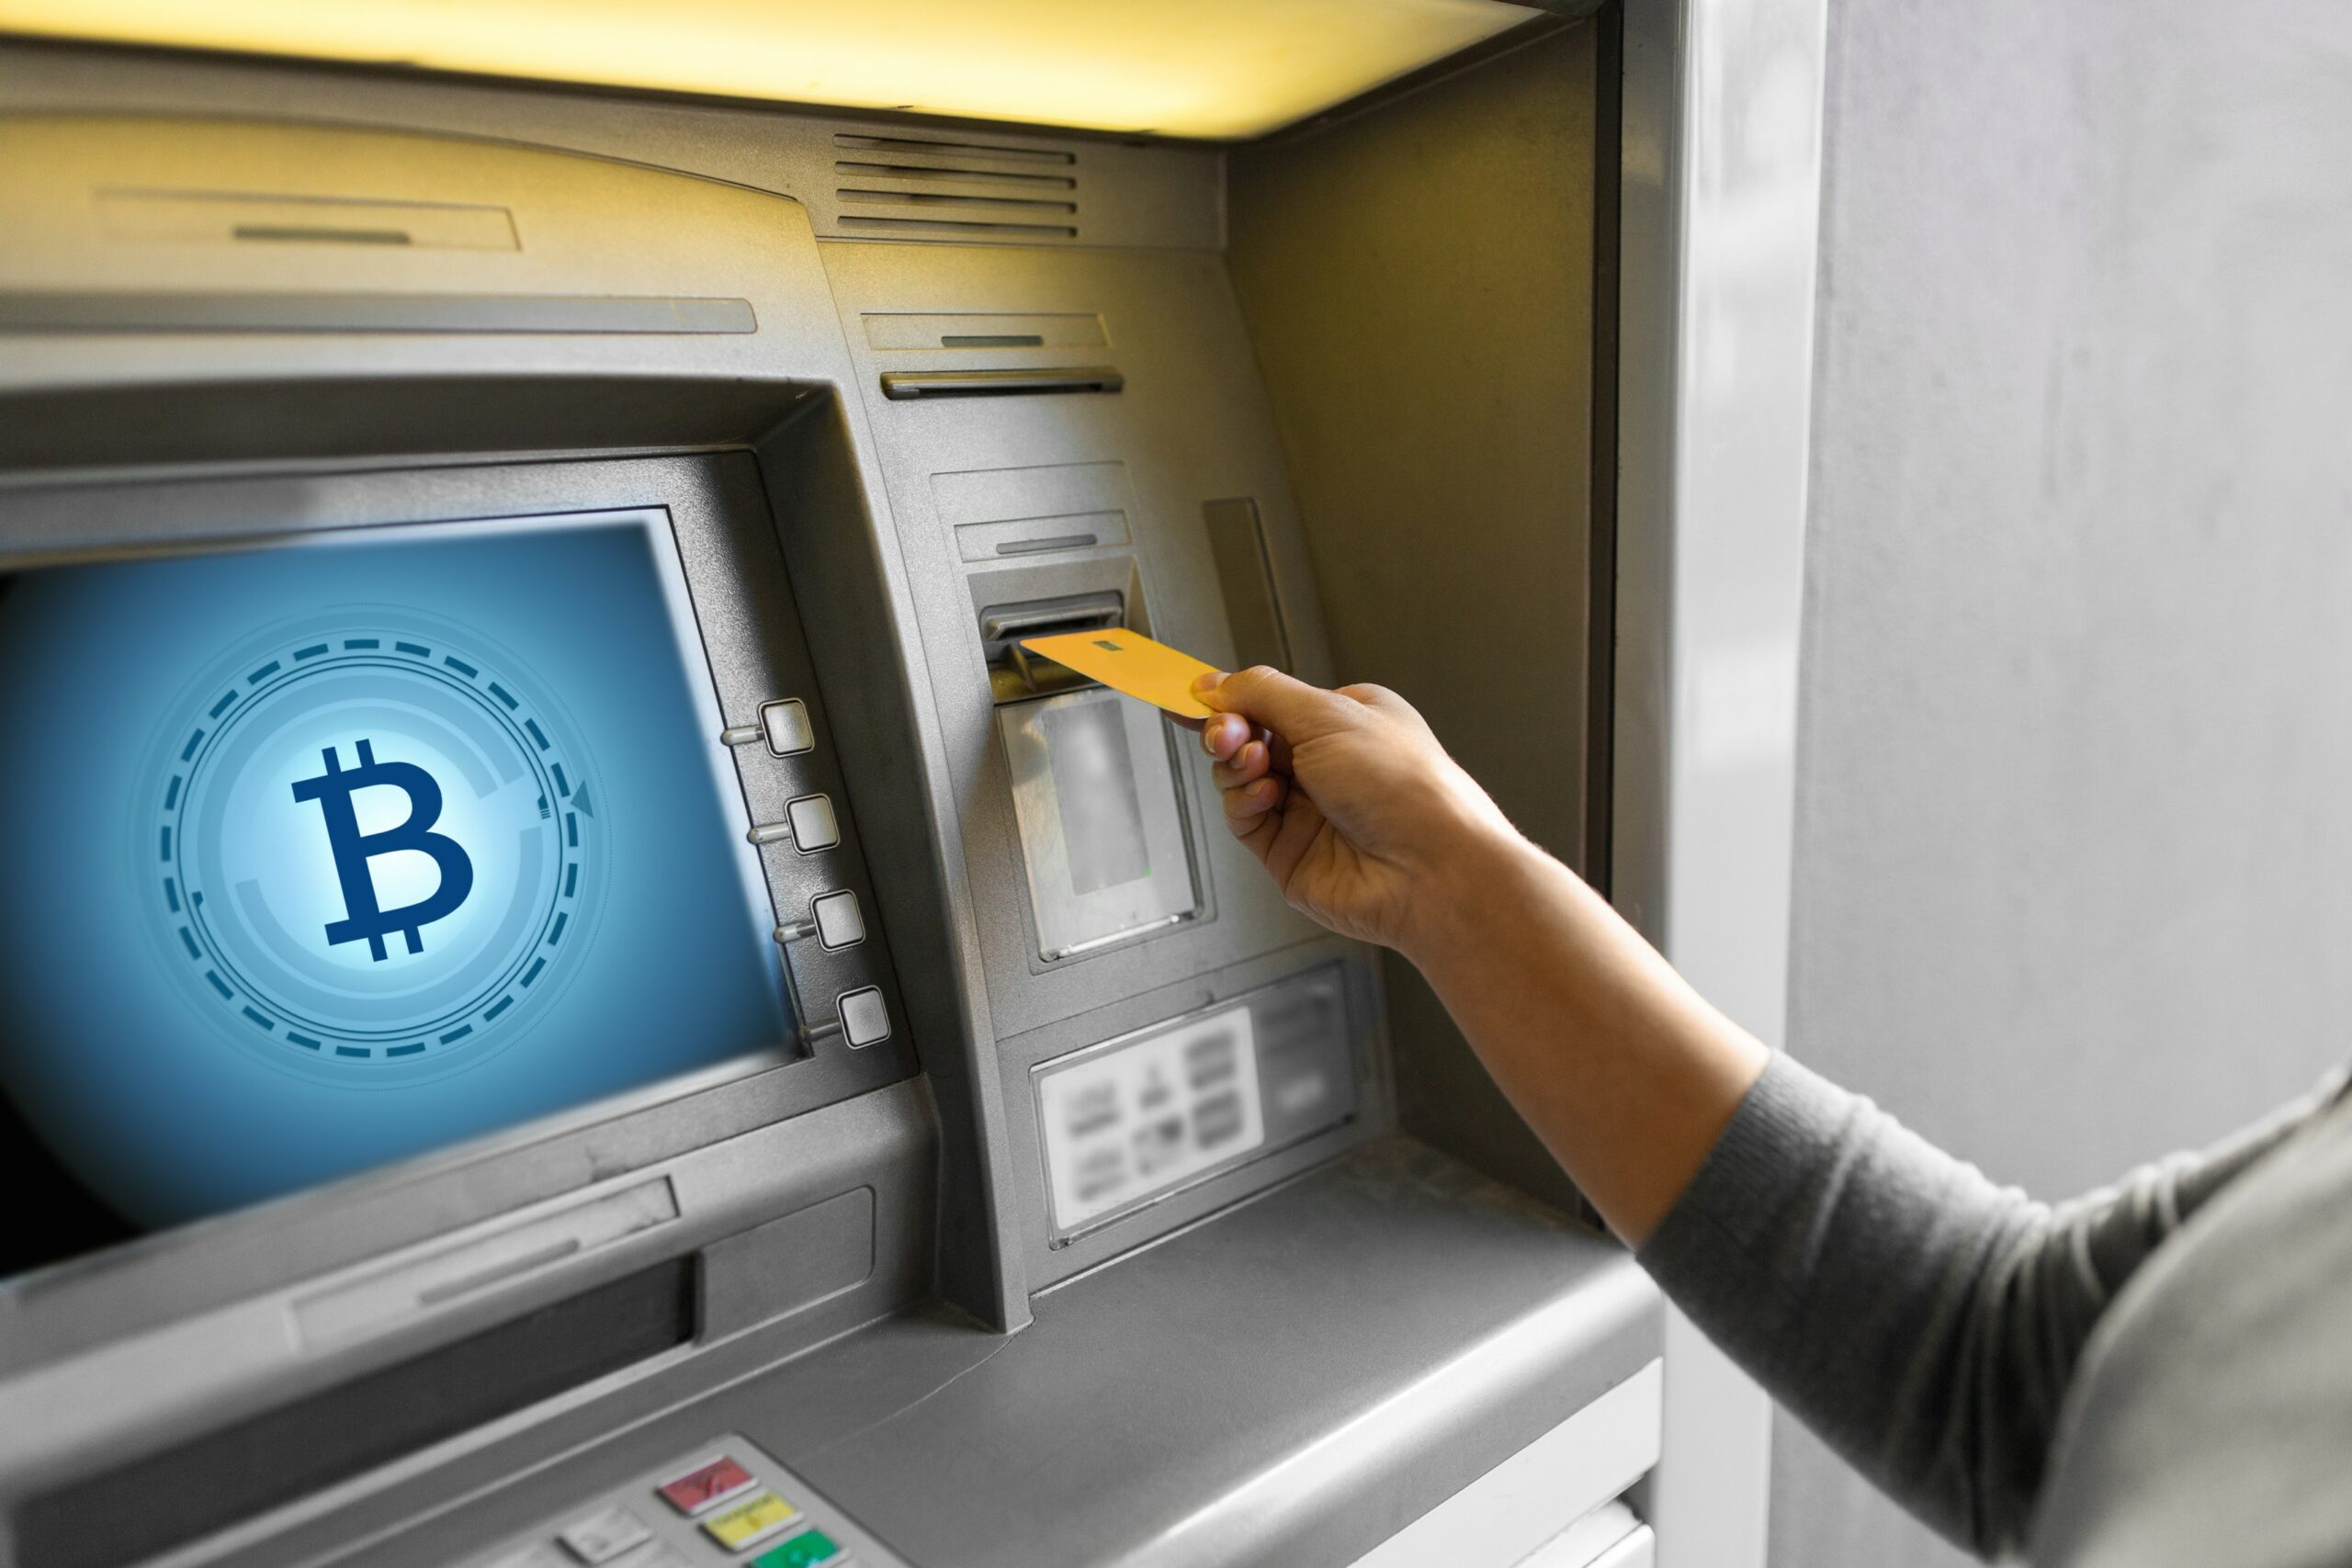 000 counting hundreds bitcoin atms week